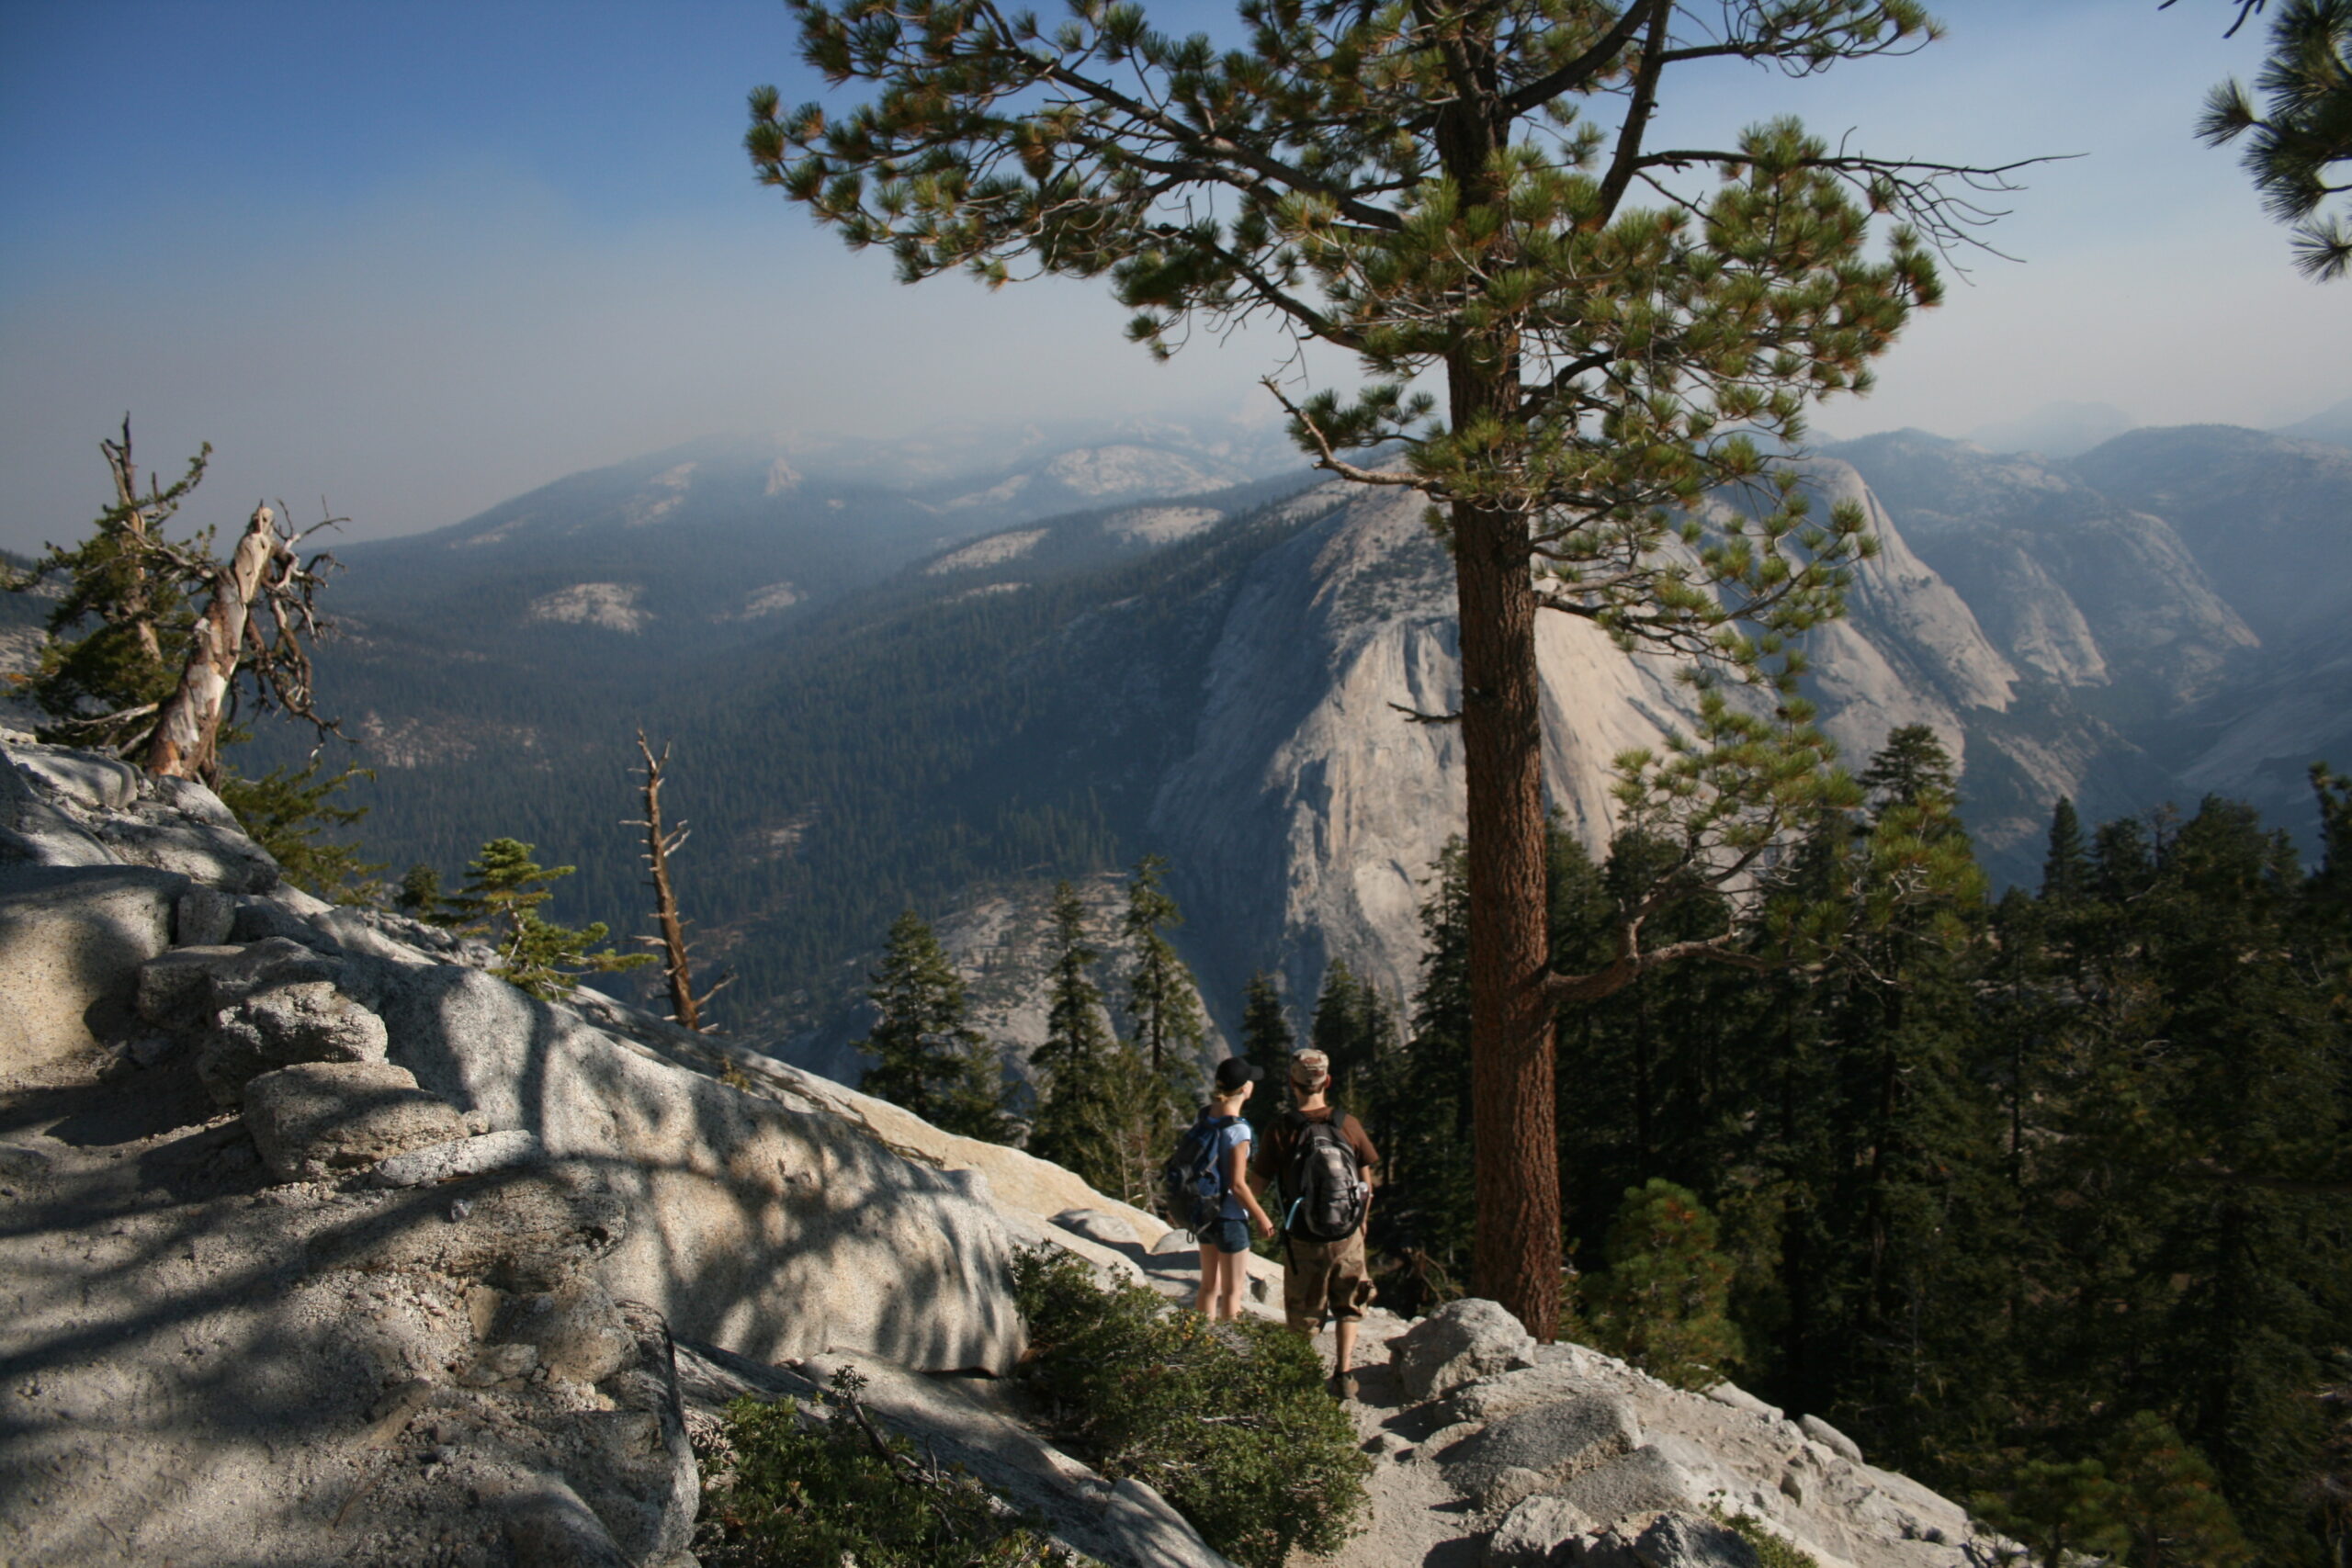 View from Half Dome sub-dome with hikers